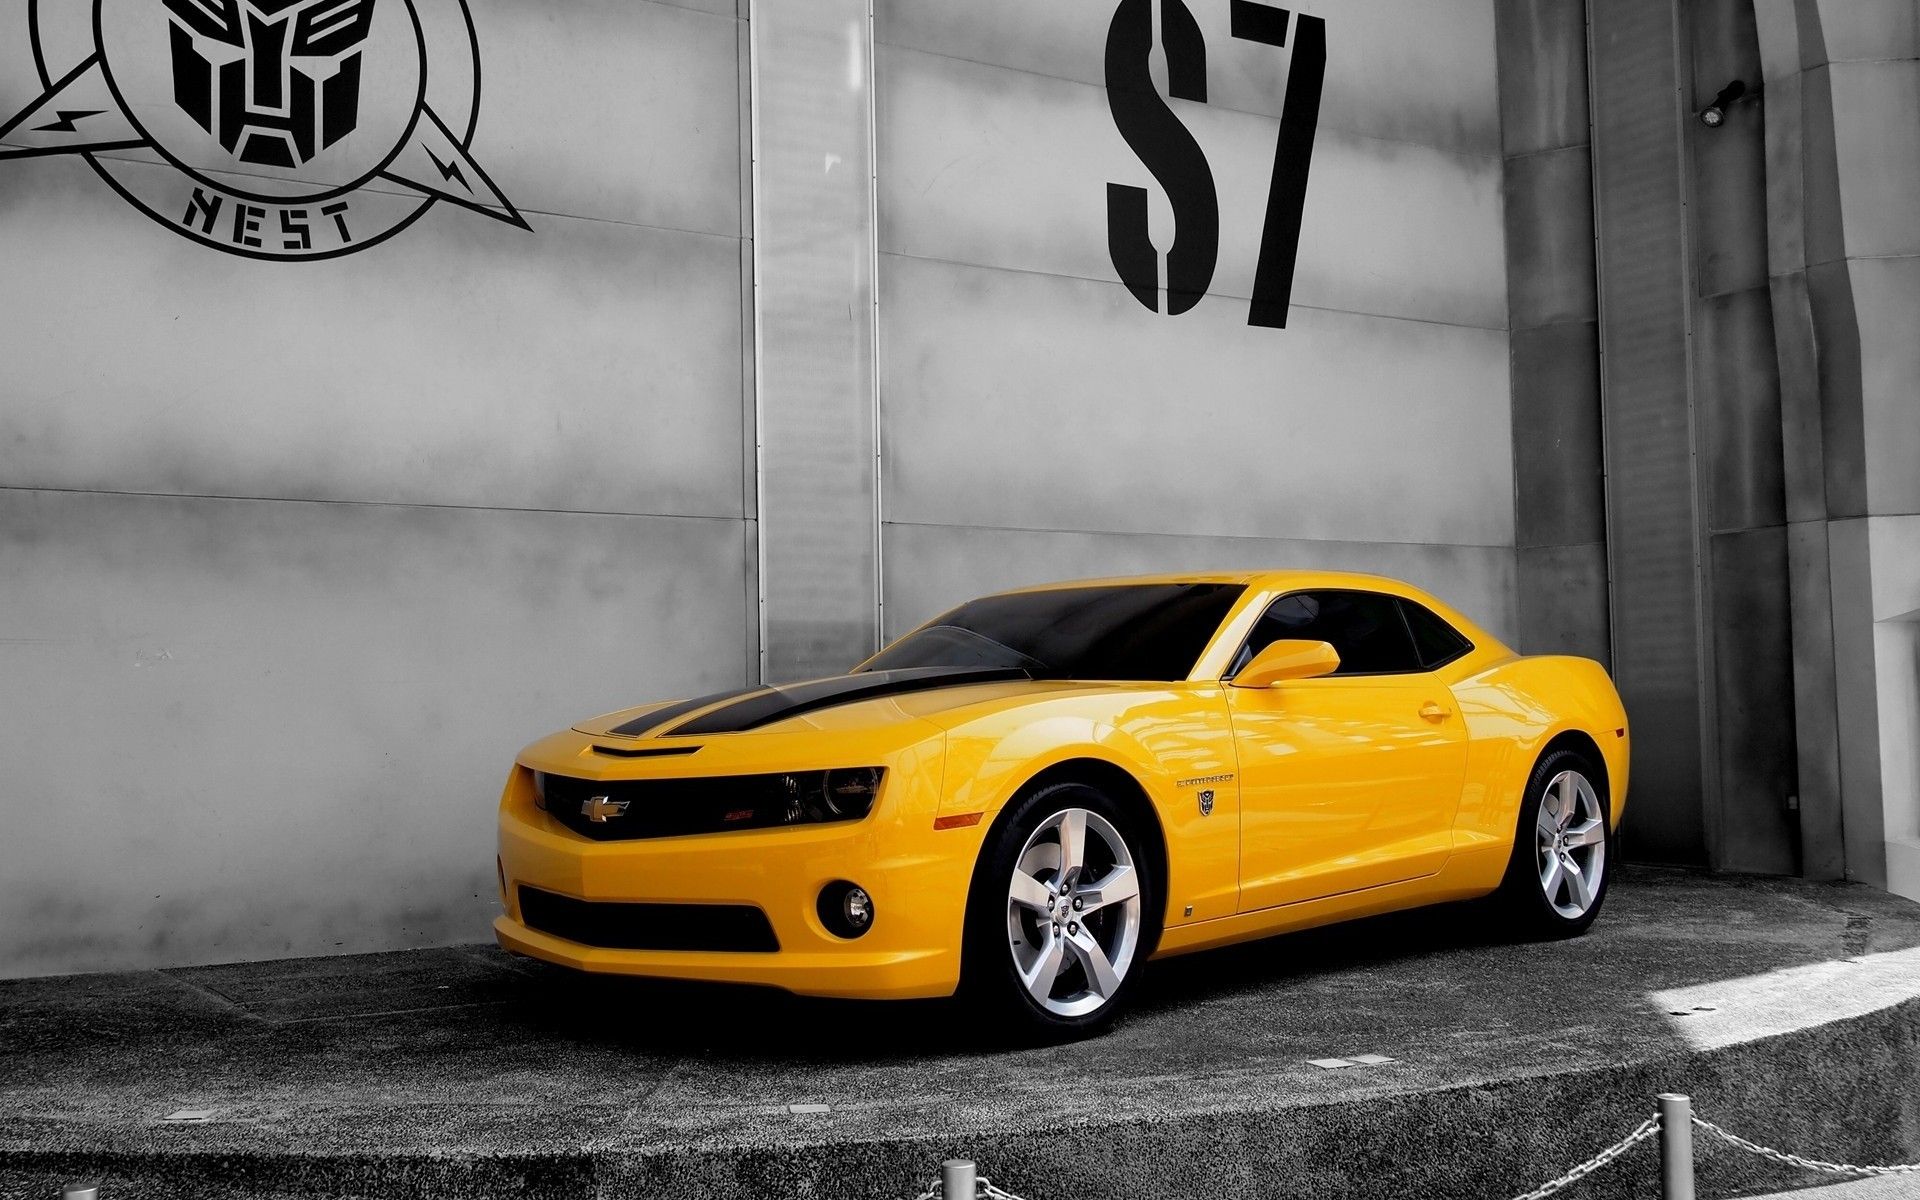 Download 1920x1200 Chevrolet Camaro, Yellow, Side View, Sport, Cars Wallpaper for MacBook Pro 17 inch